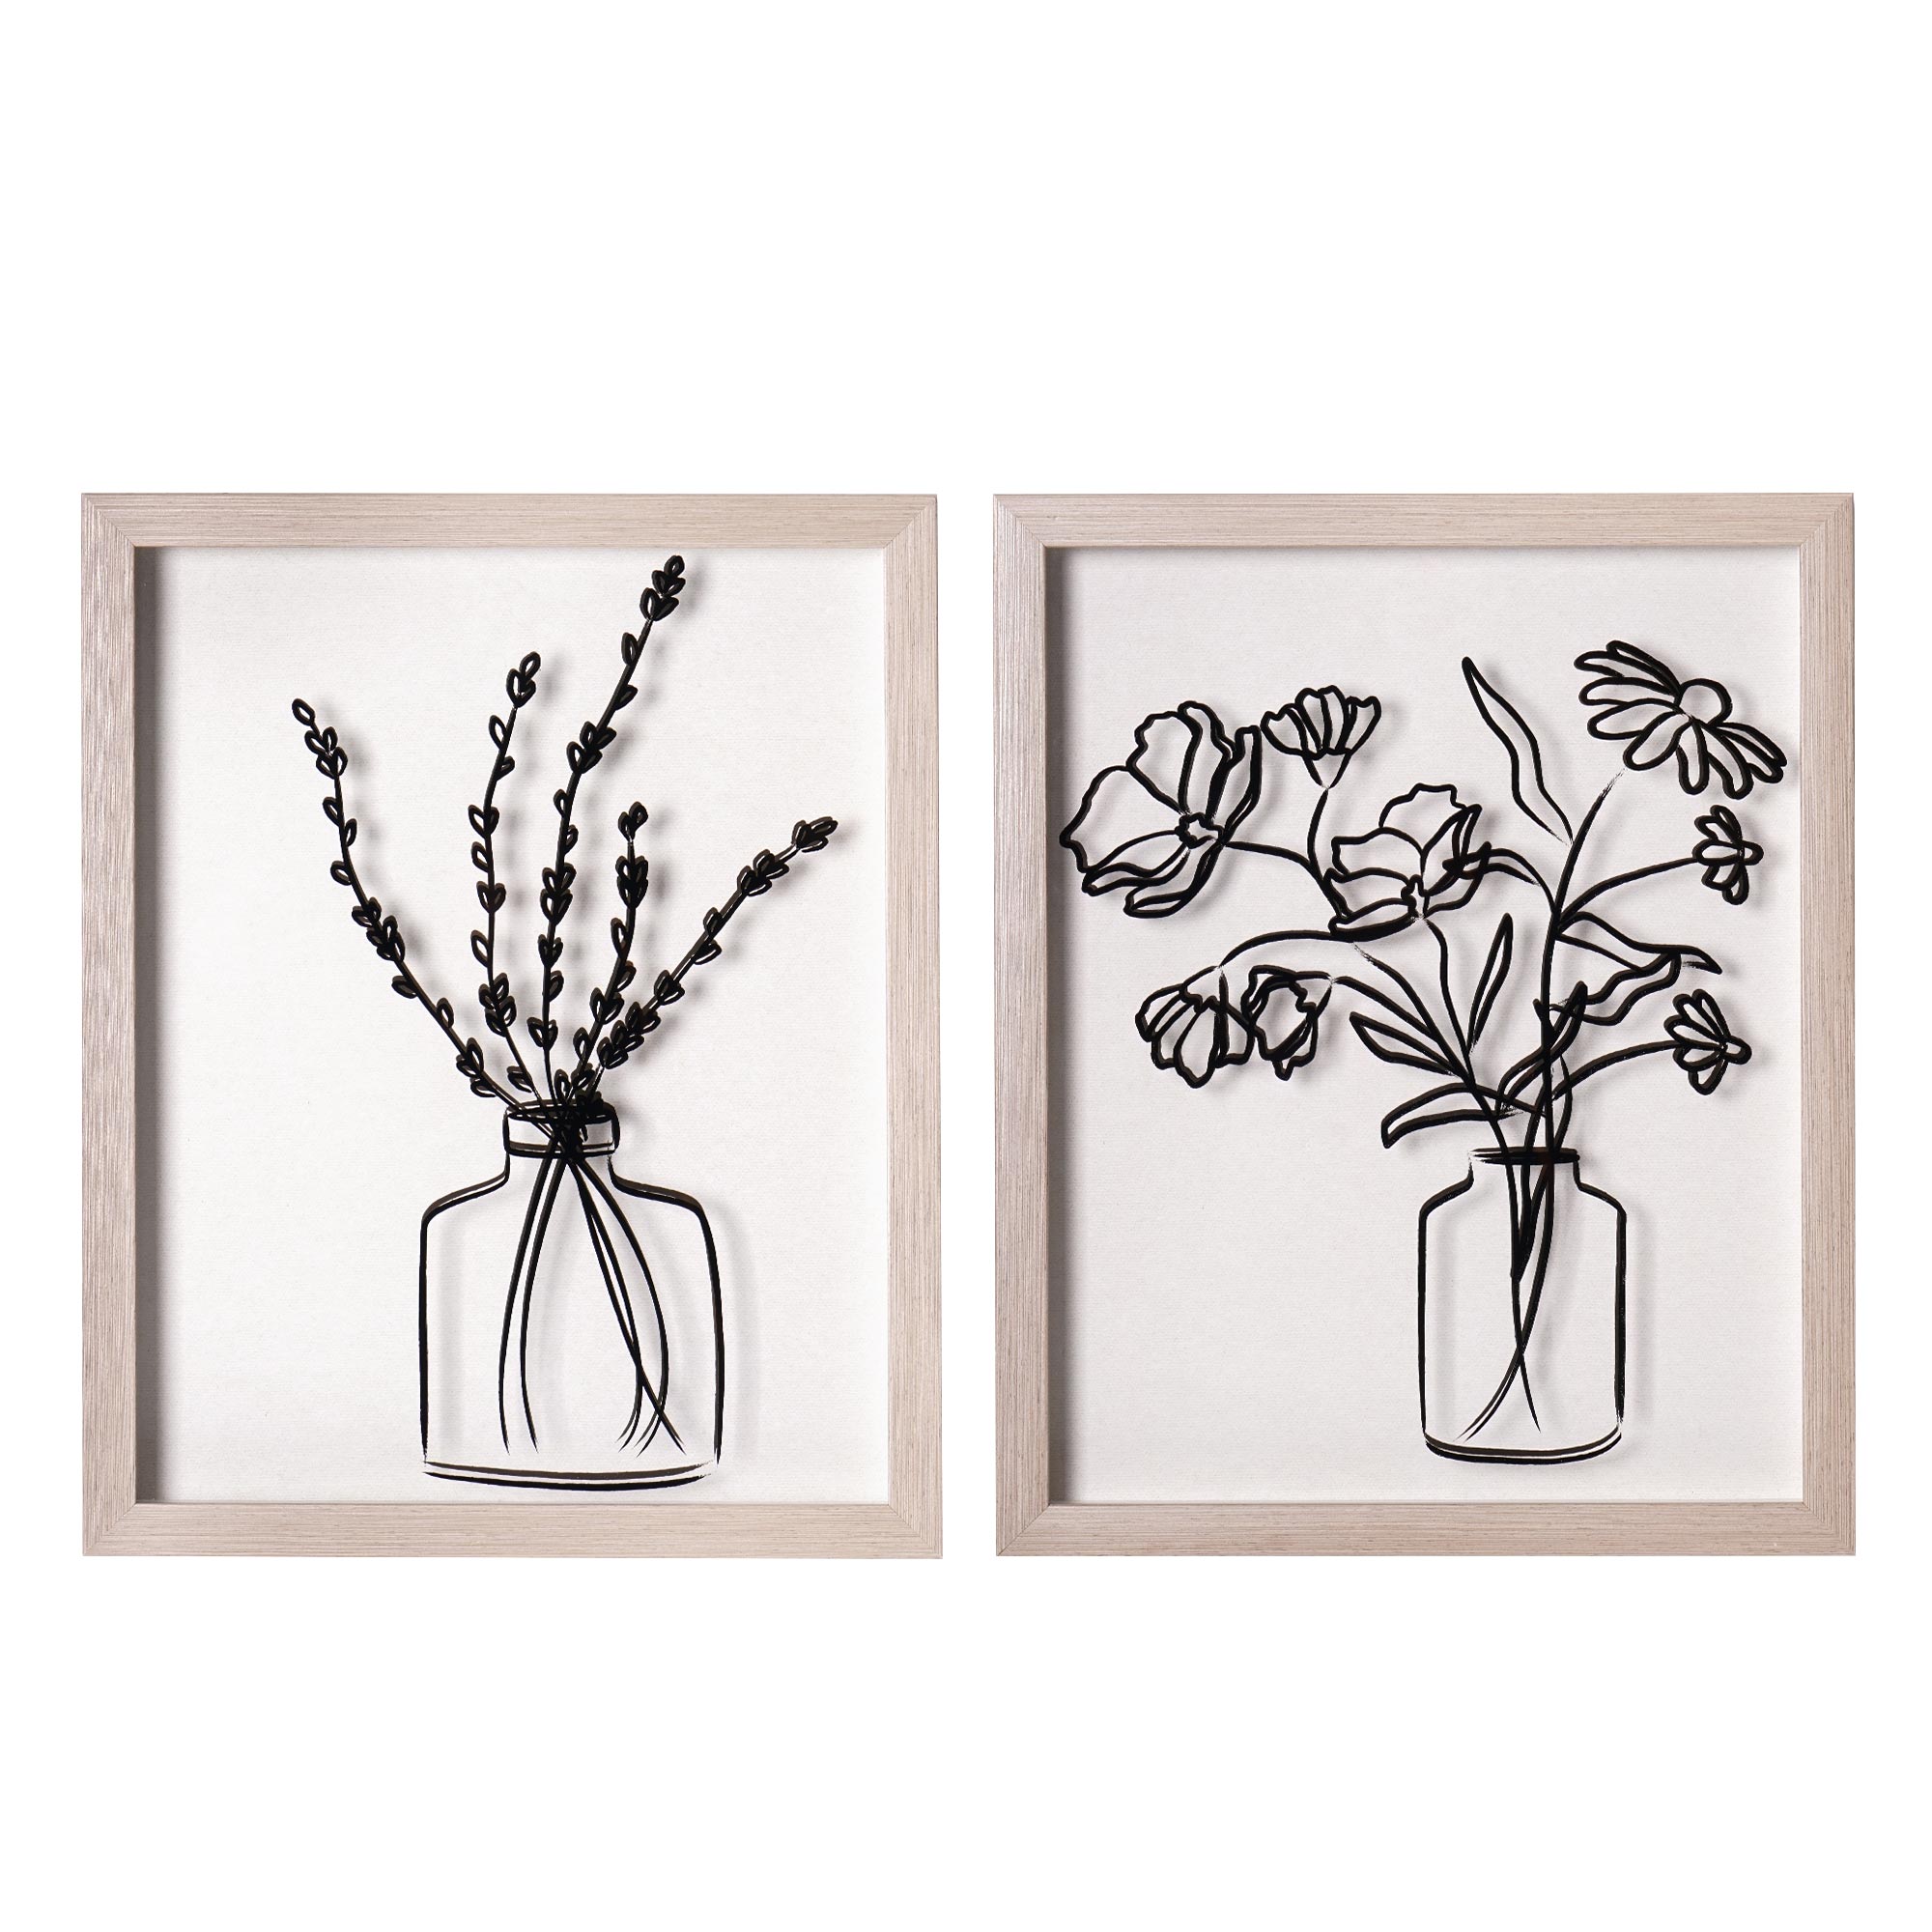 Crystal Art Gallery Florals in Vase Black Print on Clear Framed Wall Decor 11" x 14" Set of 2 - image 5 of 6